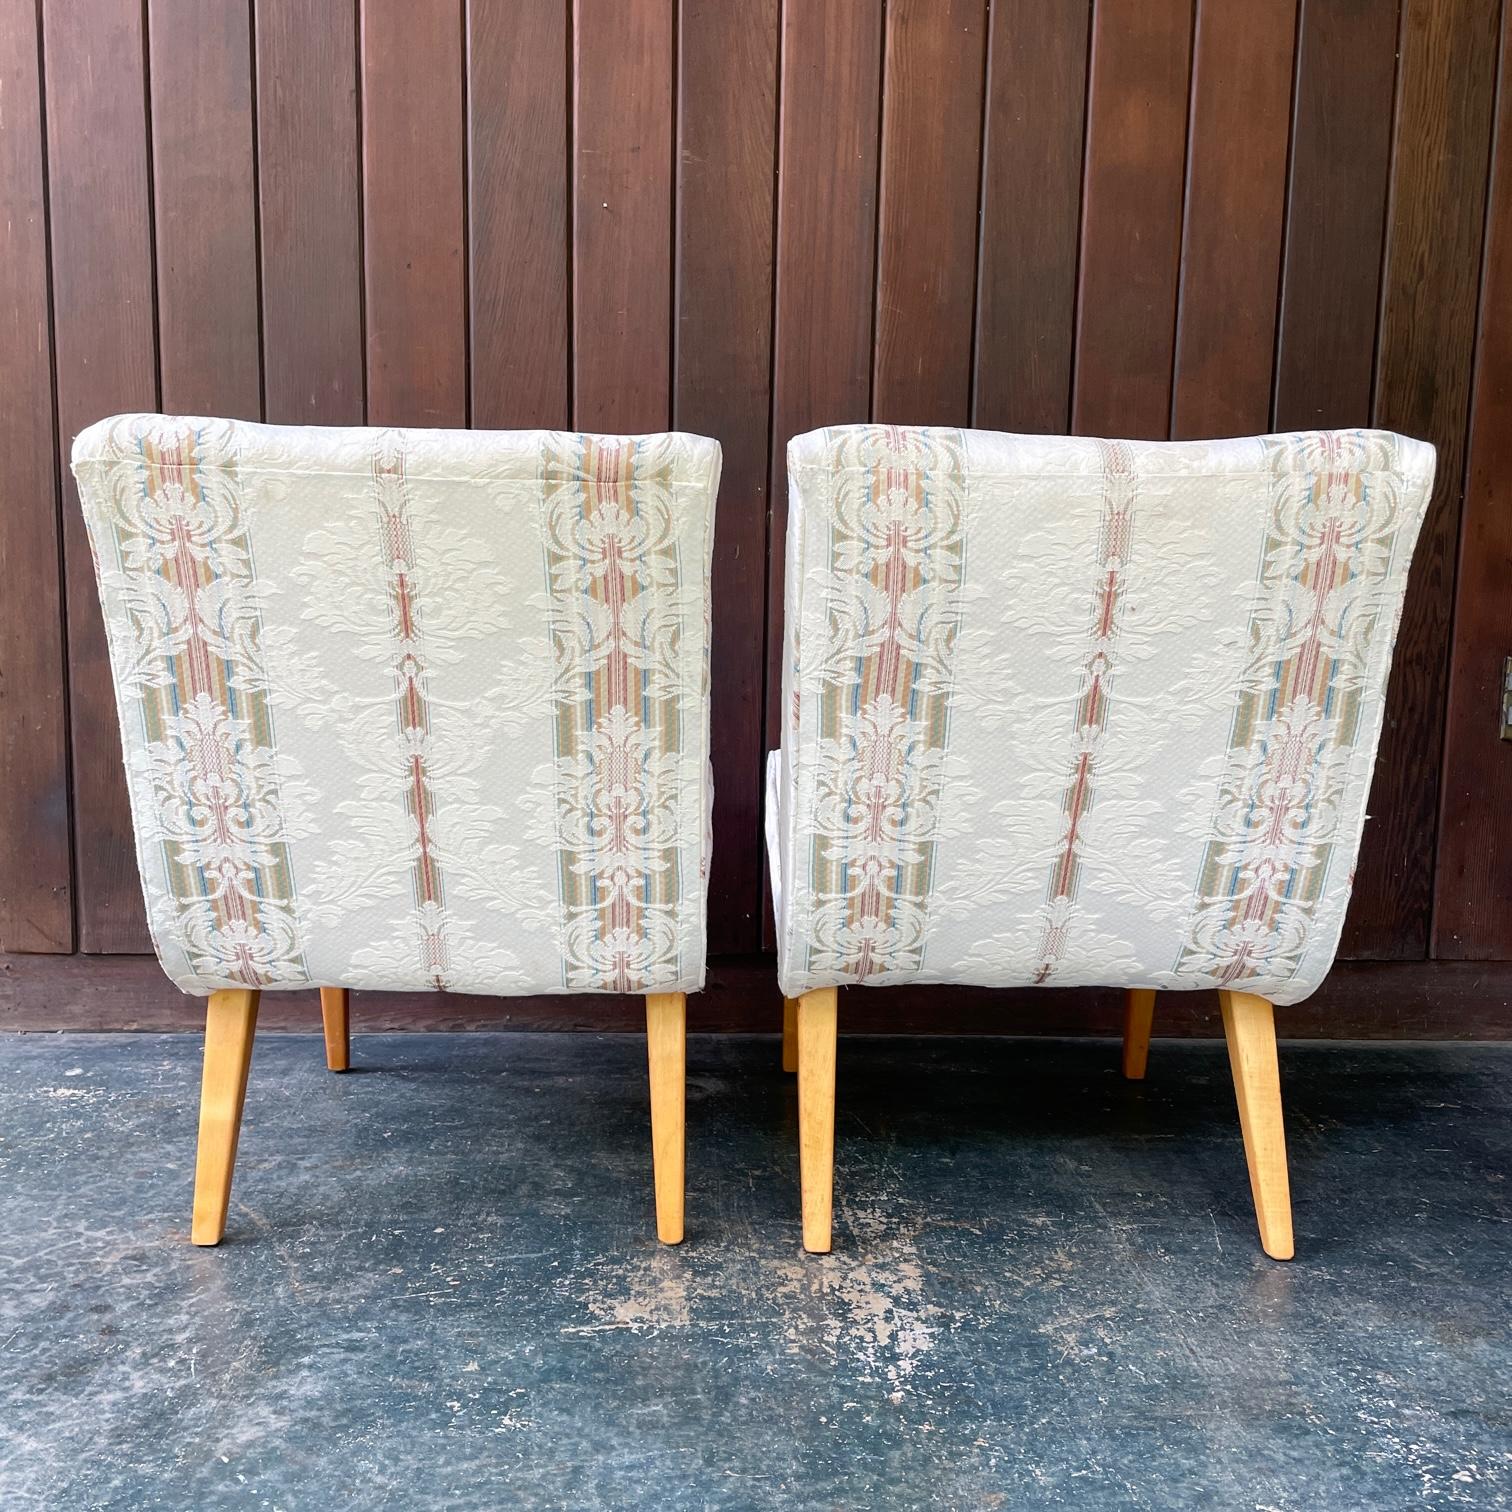 1940s Jens Risom Knoll Pair Upholstered Slipper Lounge Chairs Midcentury In Fair Condition For Sale In Hyattsville, MD